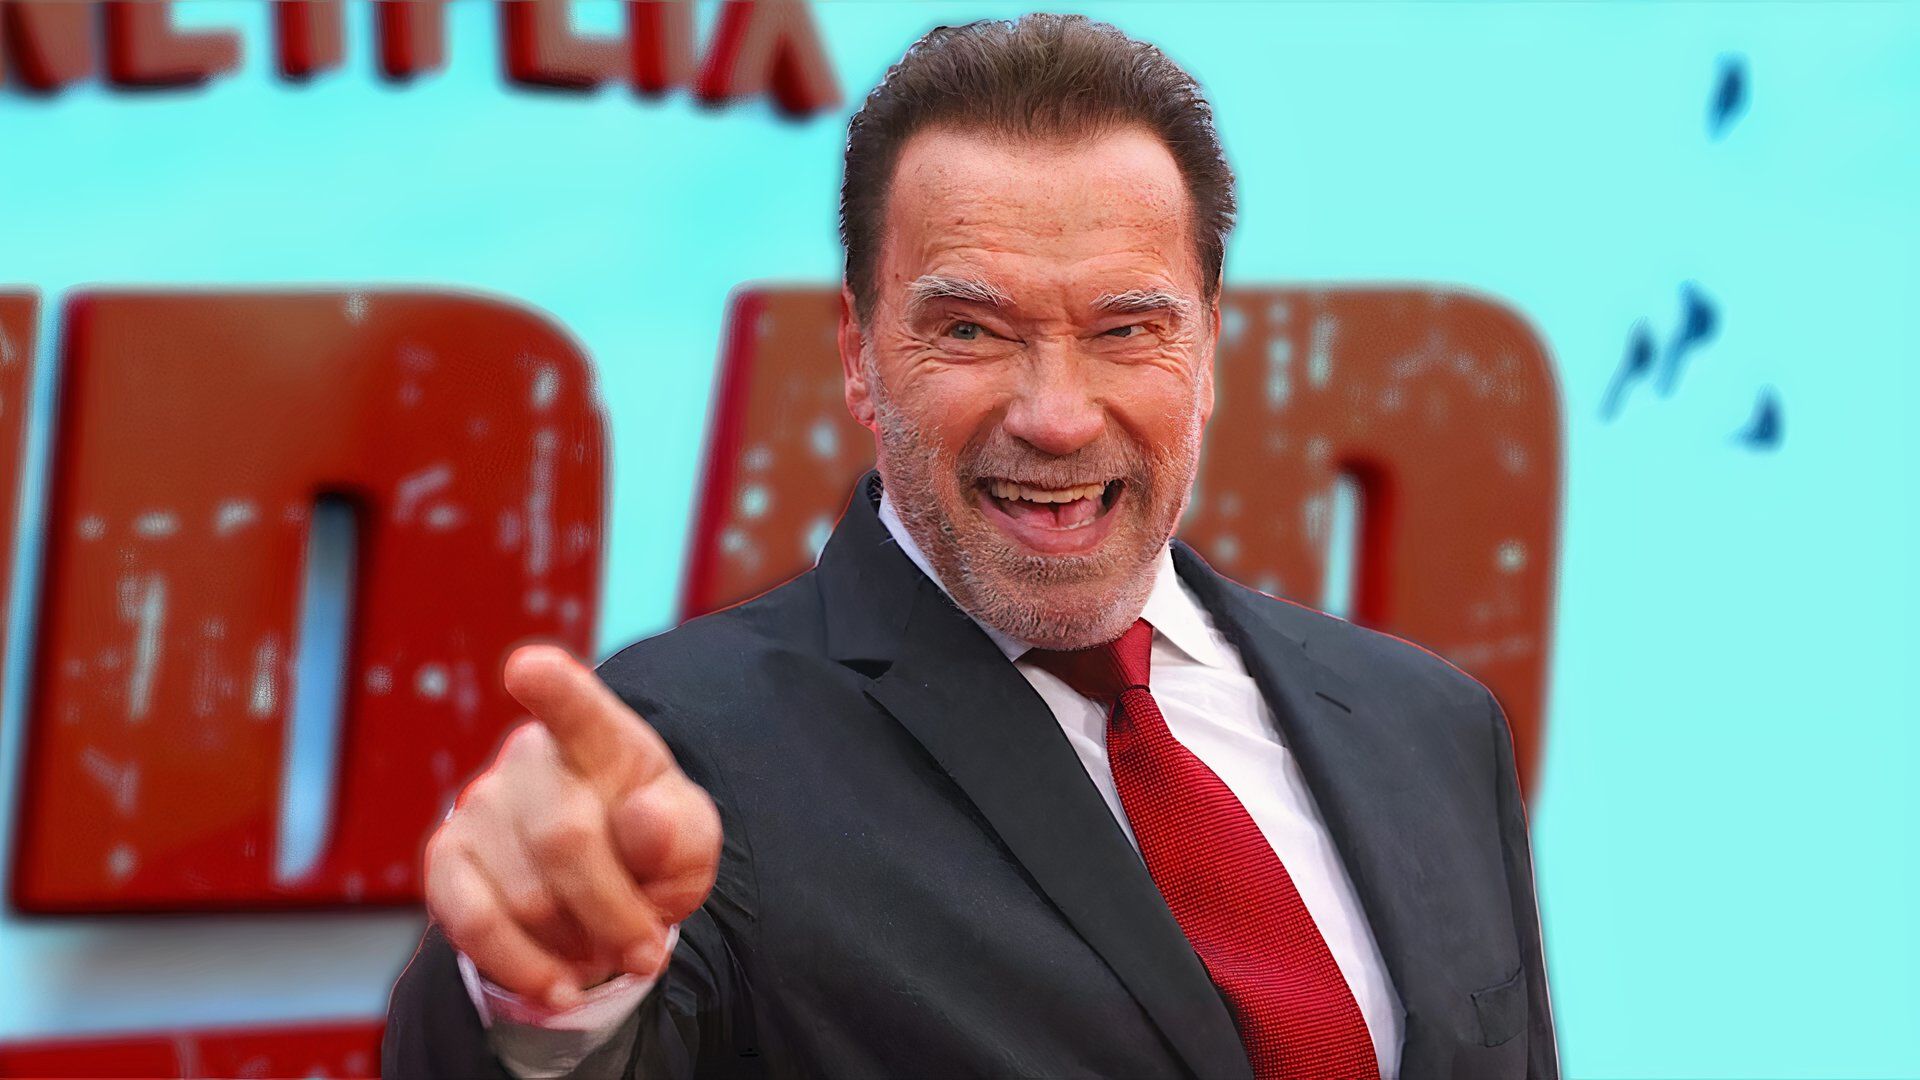 Arnold Schwarzenegger pointing a finger and laughing